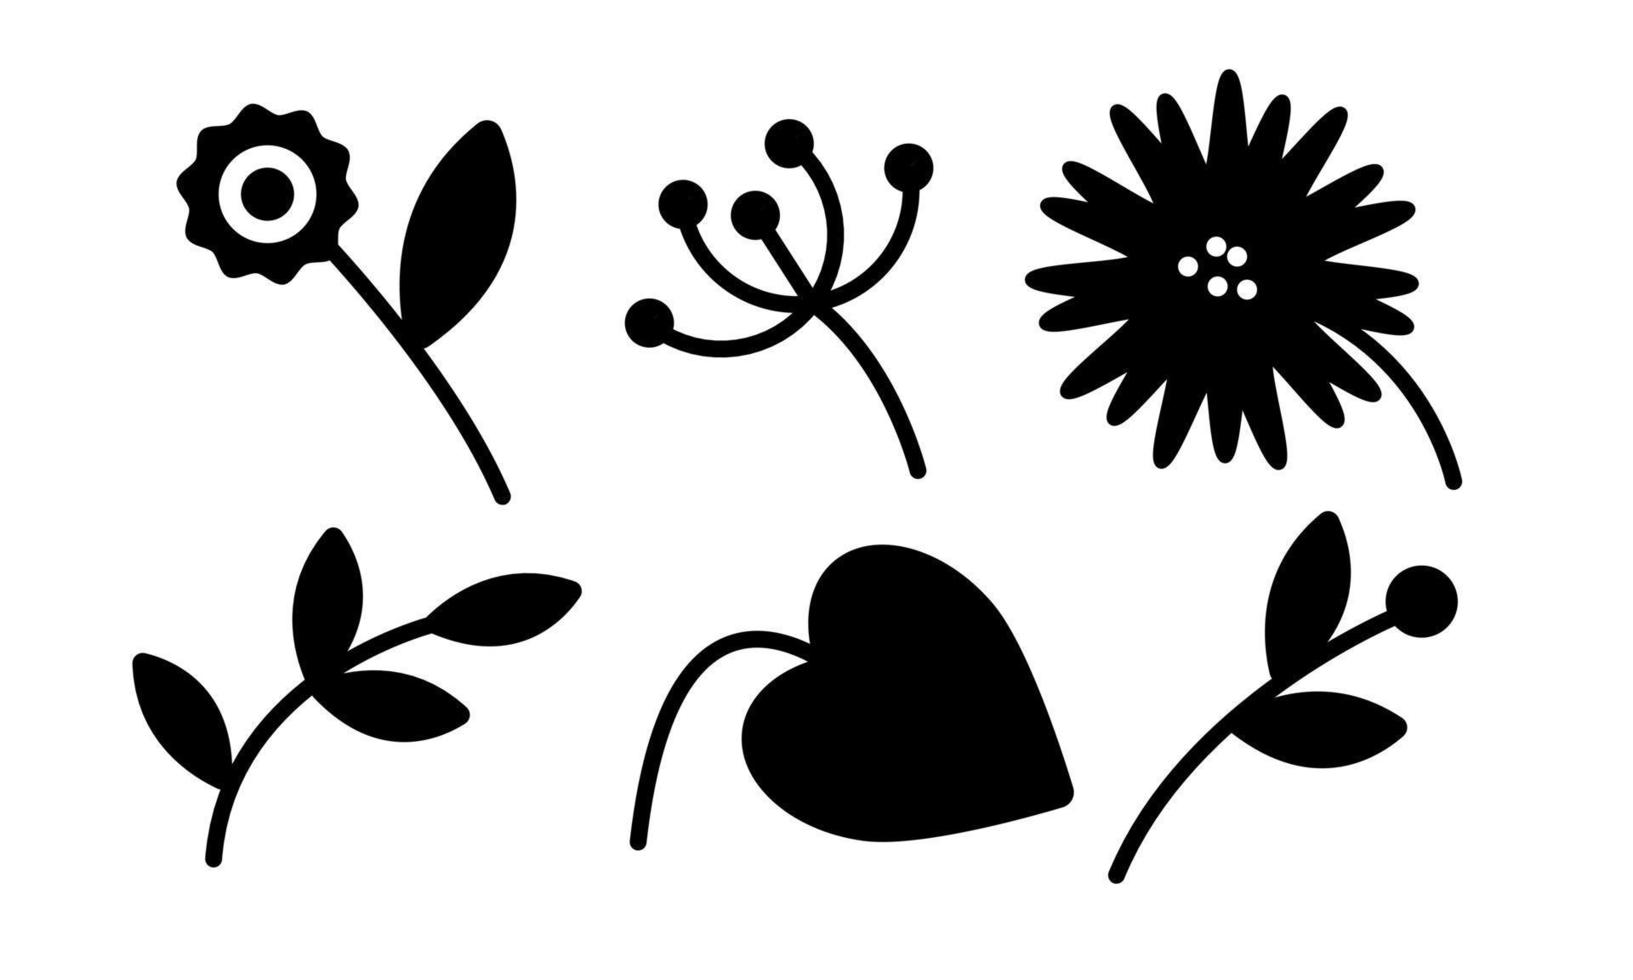 Floral elements. Silhouette of simply shapes flower and leaf. Vector illustration on white background for web, print